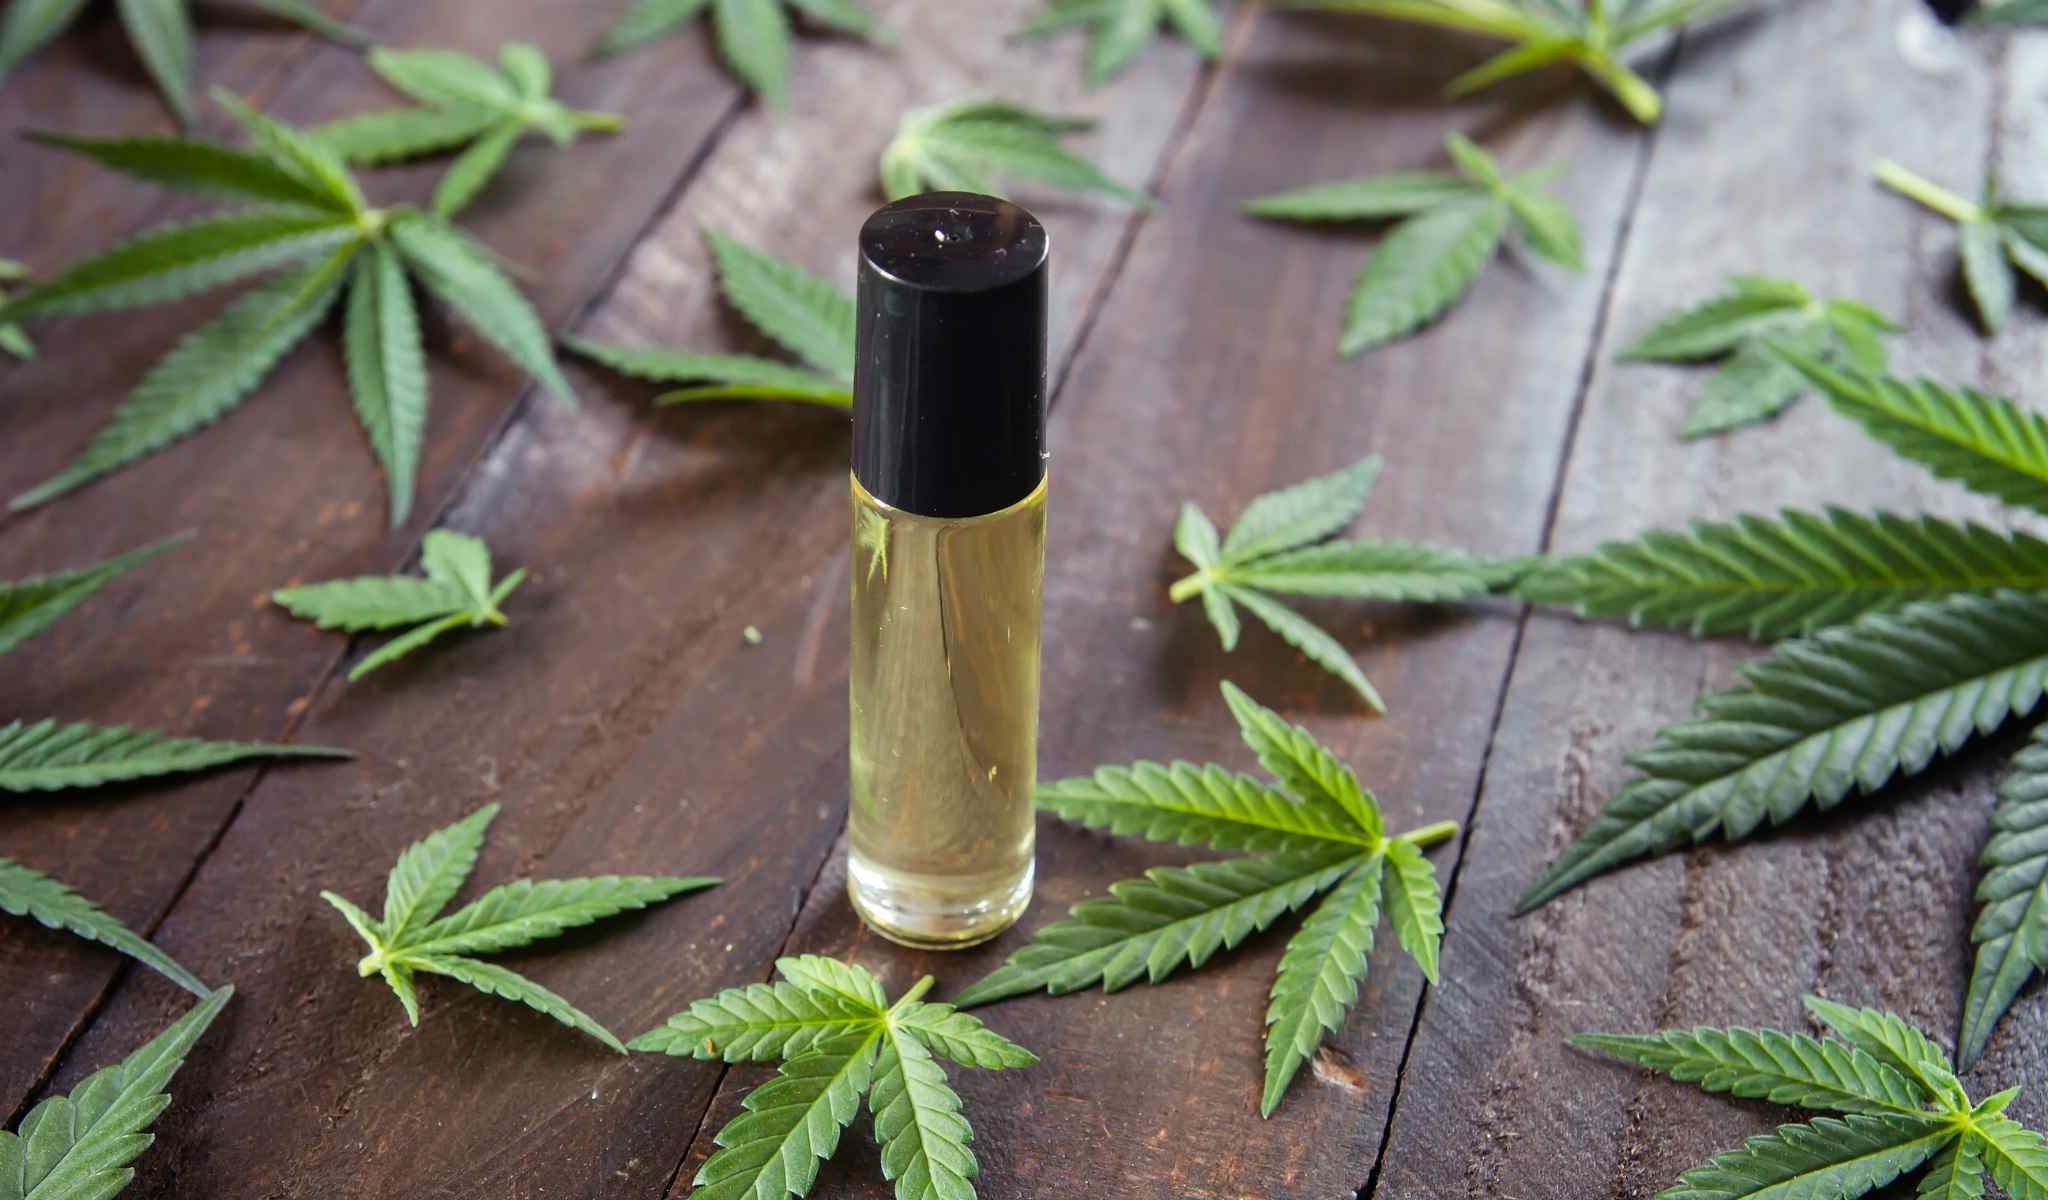 Can CBD Oil Help Dementia Patients? Is CBD Safe or a Risk?